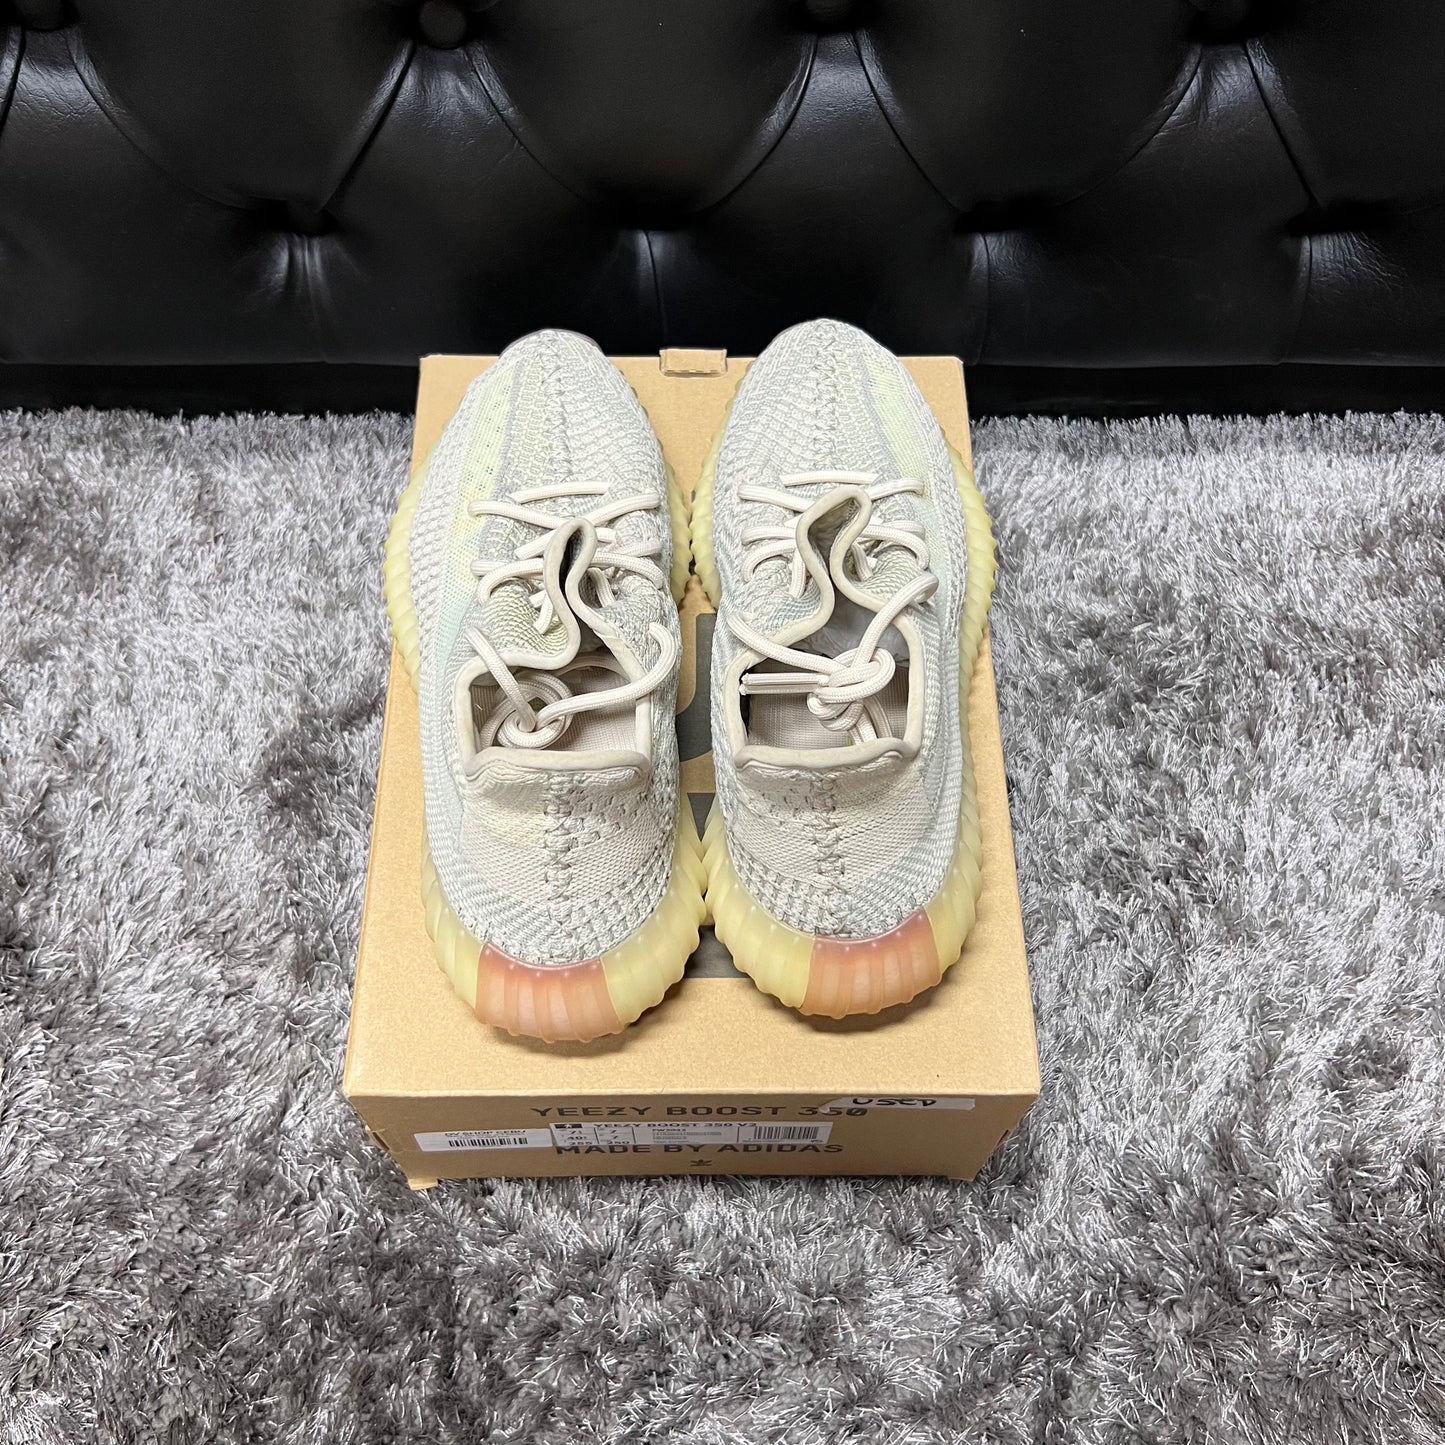 Yeezy 350 Citrin size 7.5 used